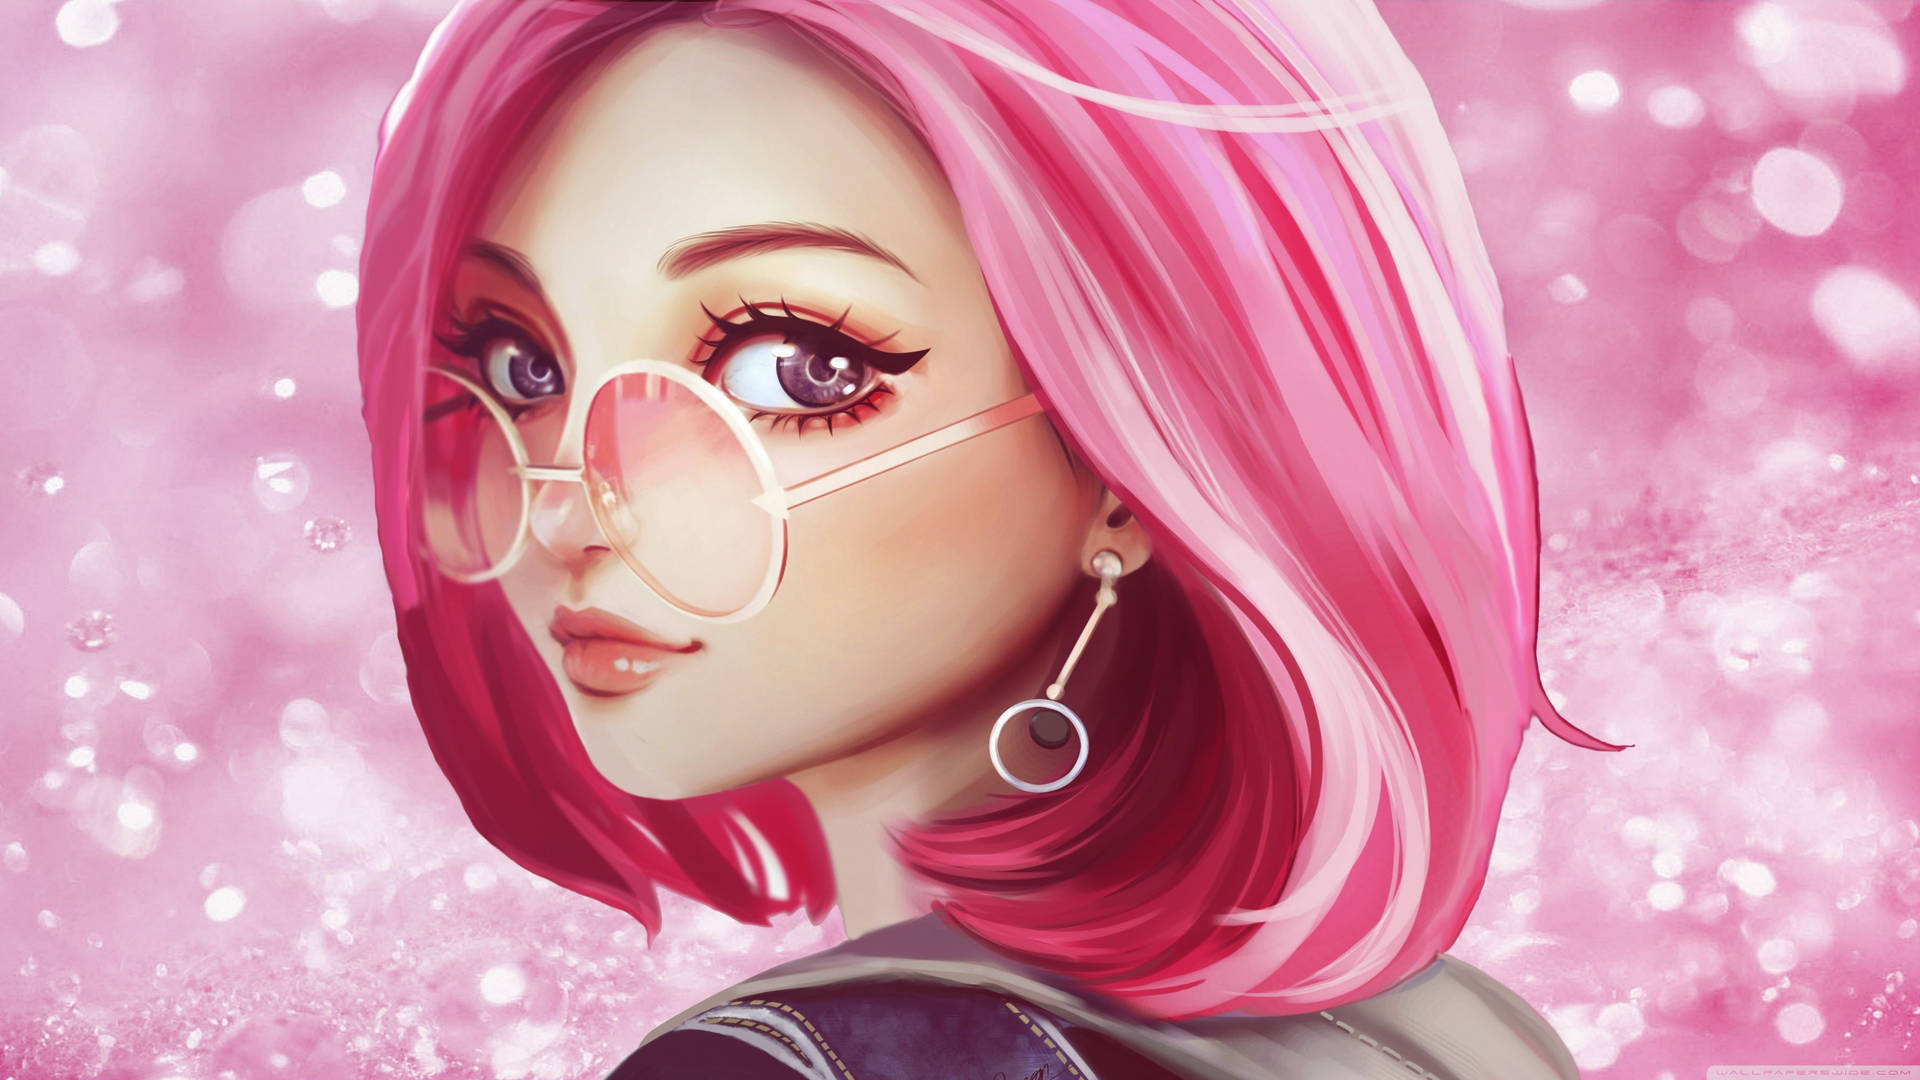 Pretty Girl Cartoon With Pink Hair Background